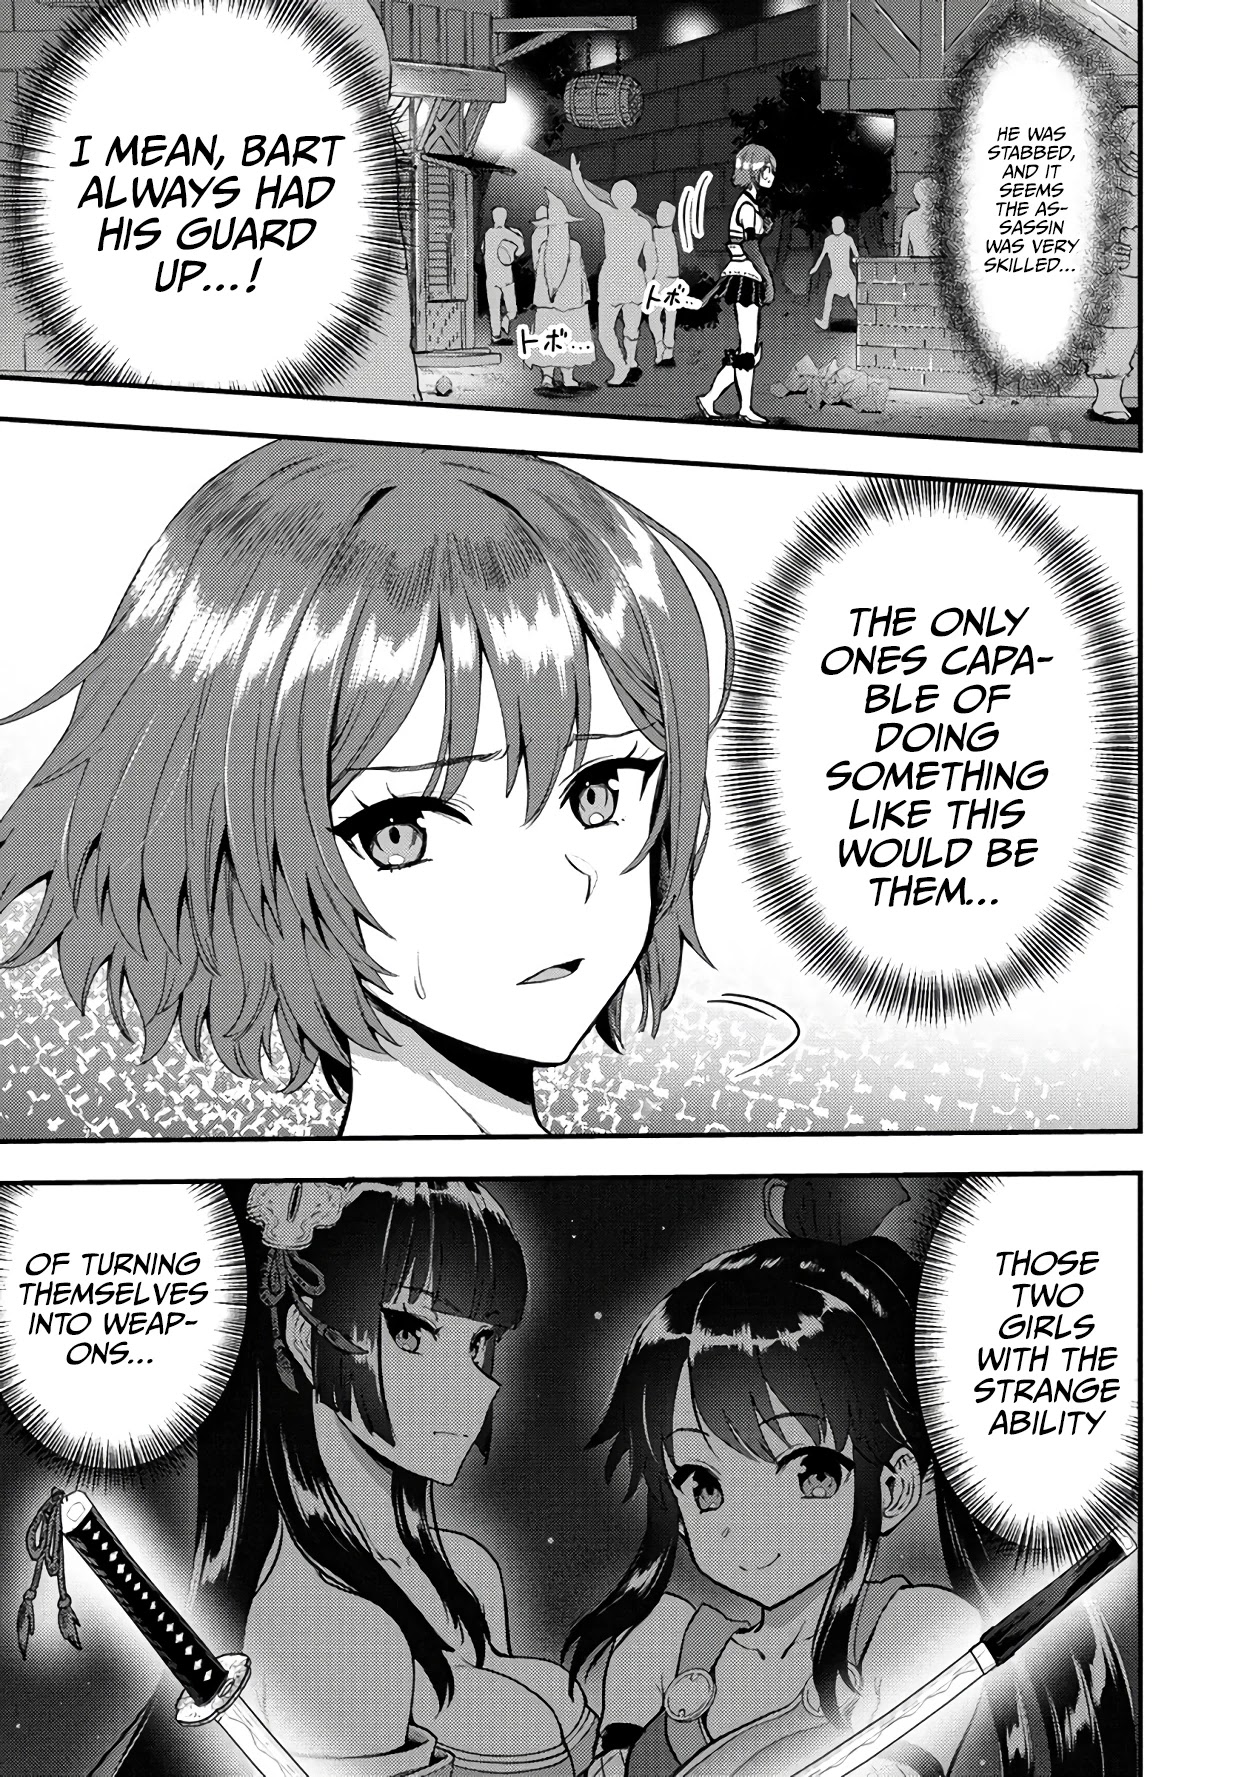 The Cursed Sword Master’S Harem Life: By The Sword, For The Sword, Cursed Sword Master - 19 page 33-5269e787